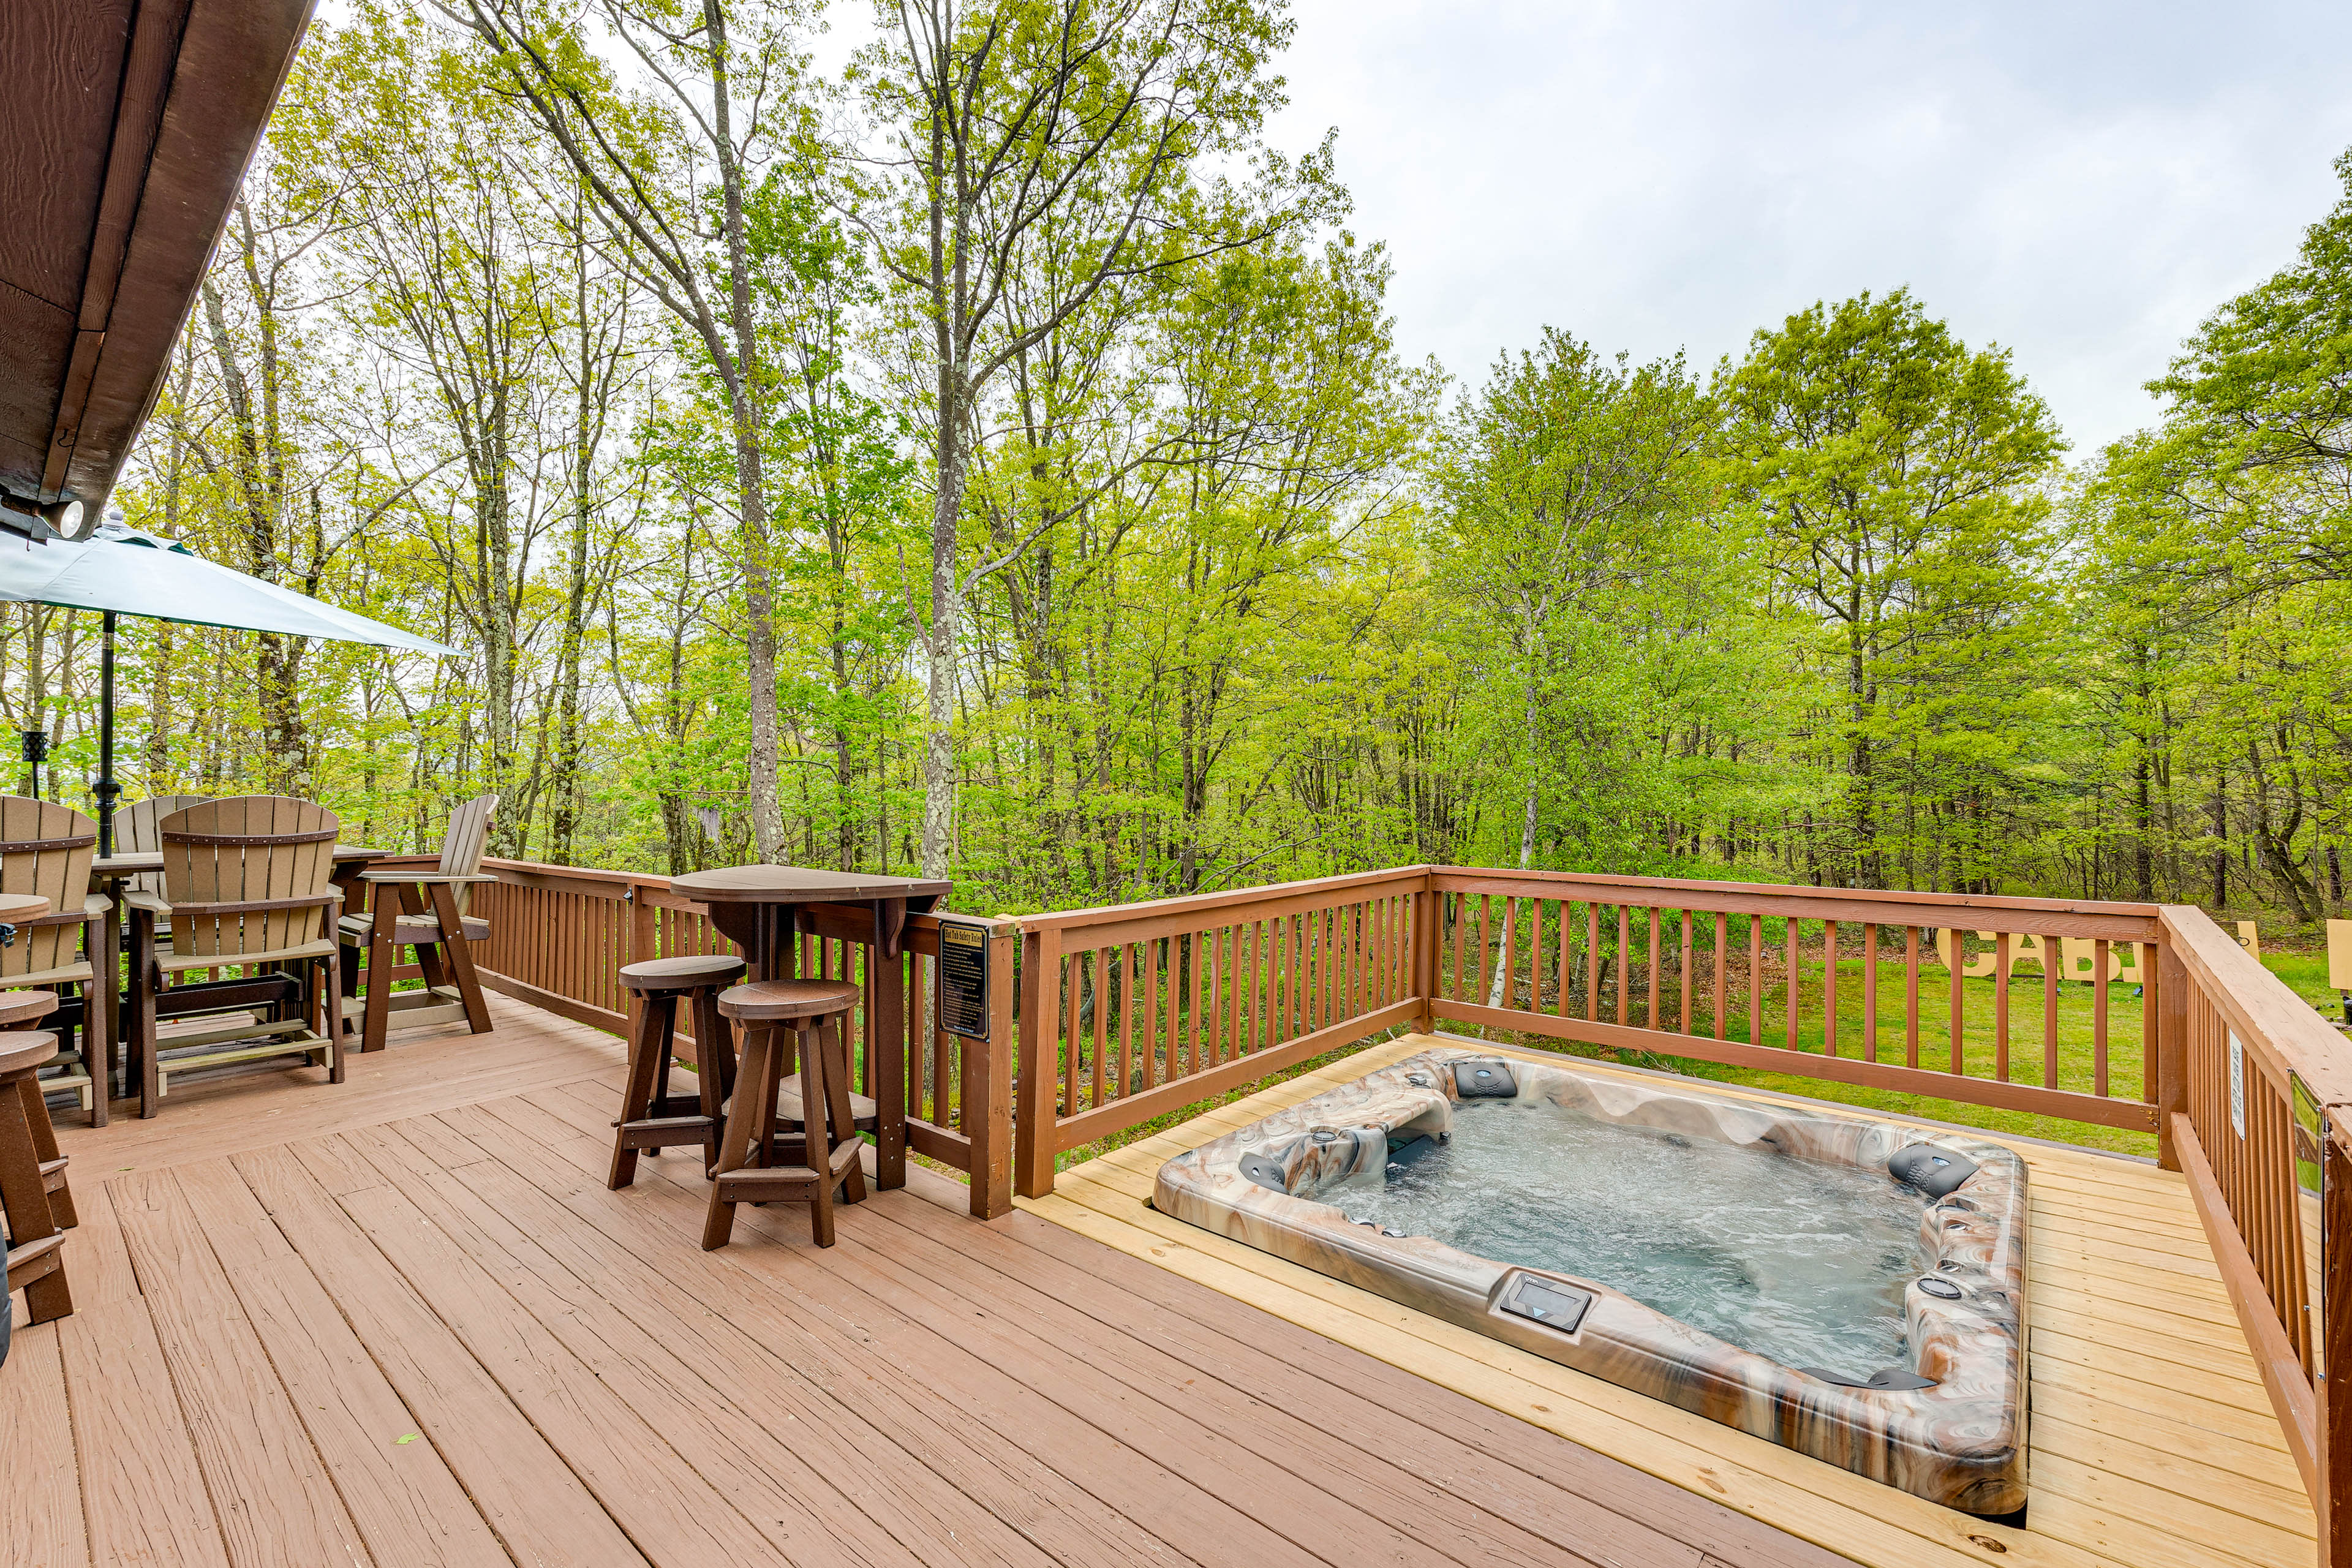 Furnished Deck | Private Hot Tub | Outdoor Dining | Spacious Yard